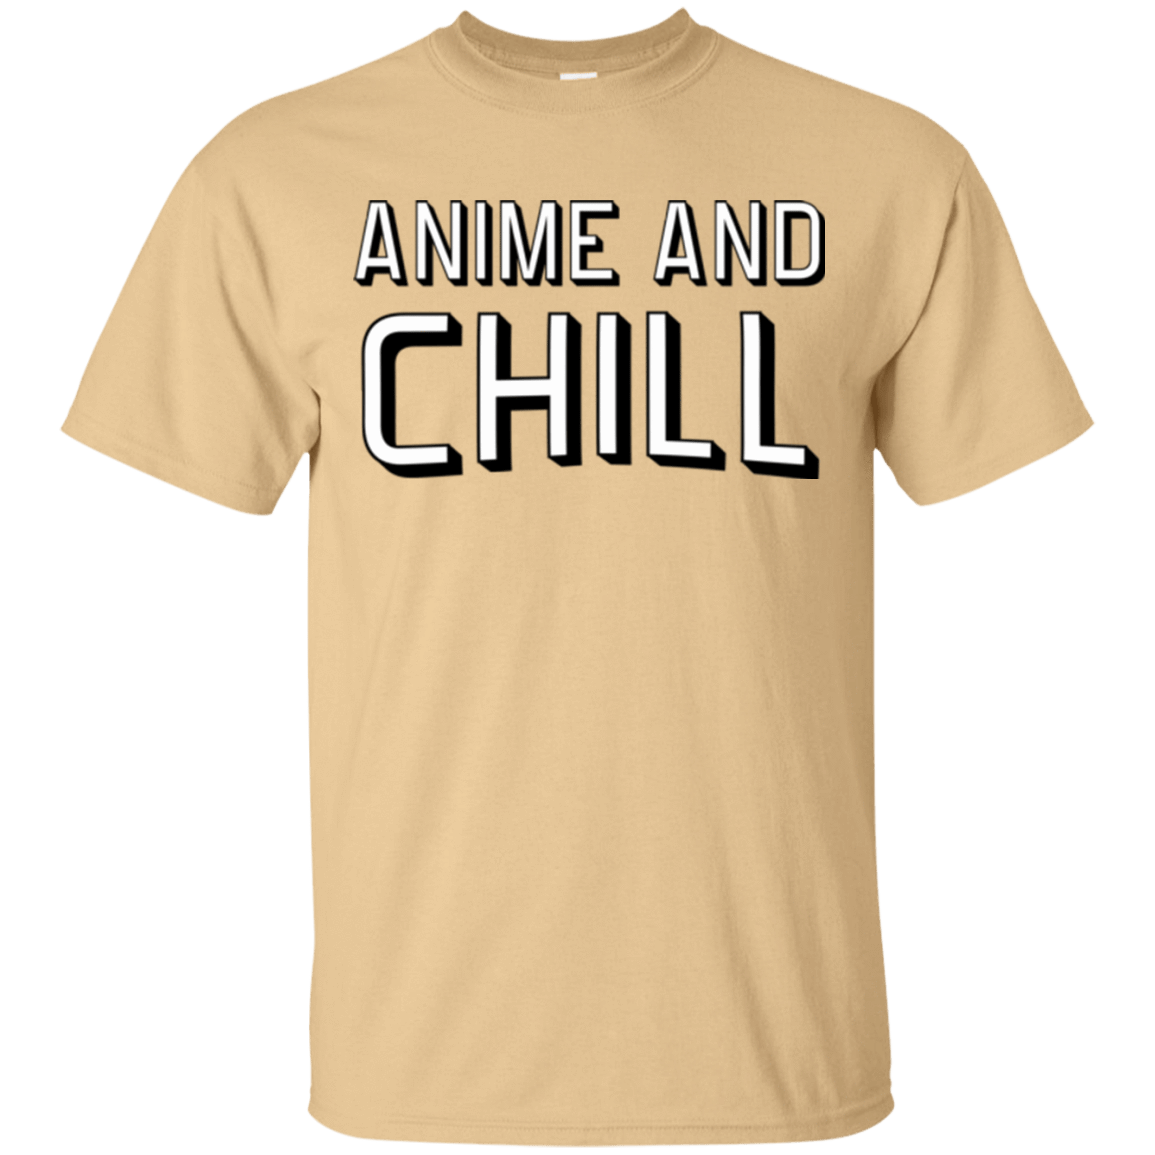 T-Shirts Vegas Gold / Small Anime and chill T-Shirt